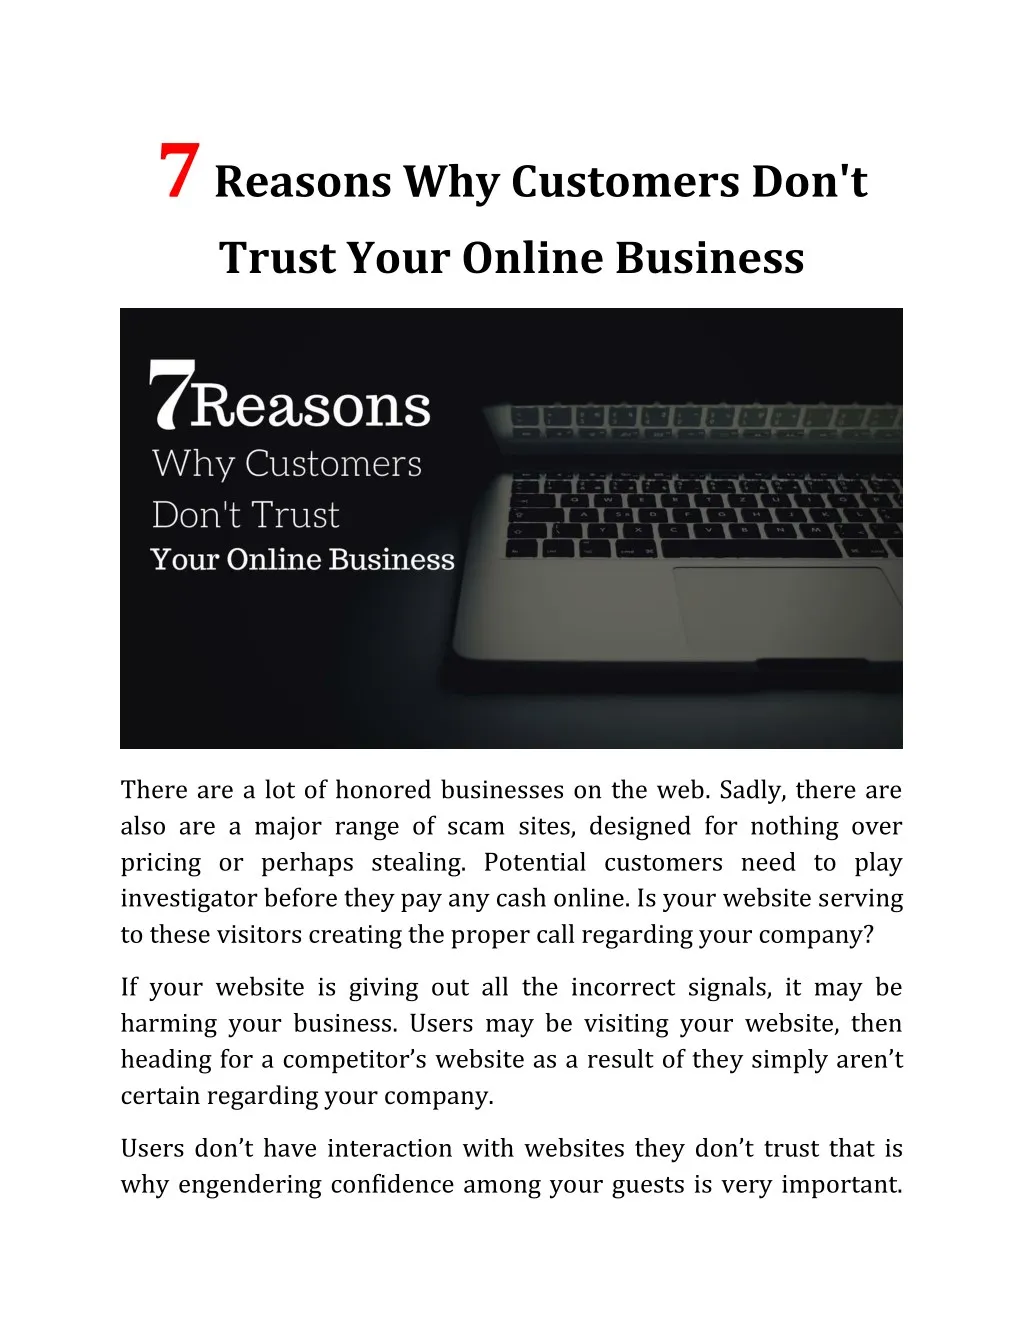 7 reasons why customers don t trust your online